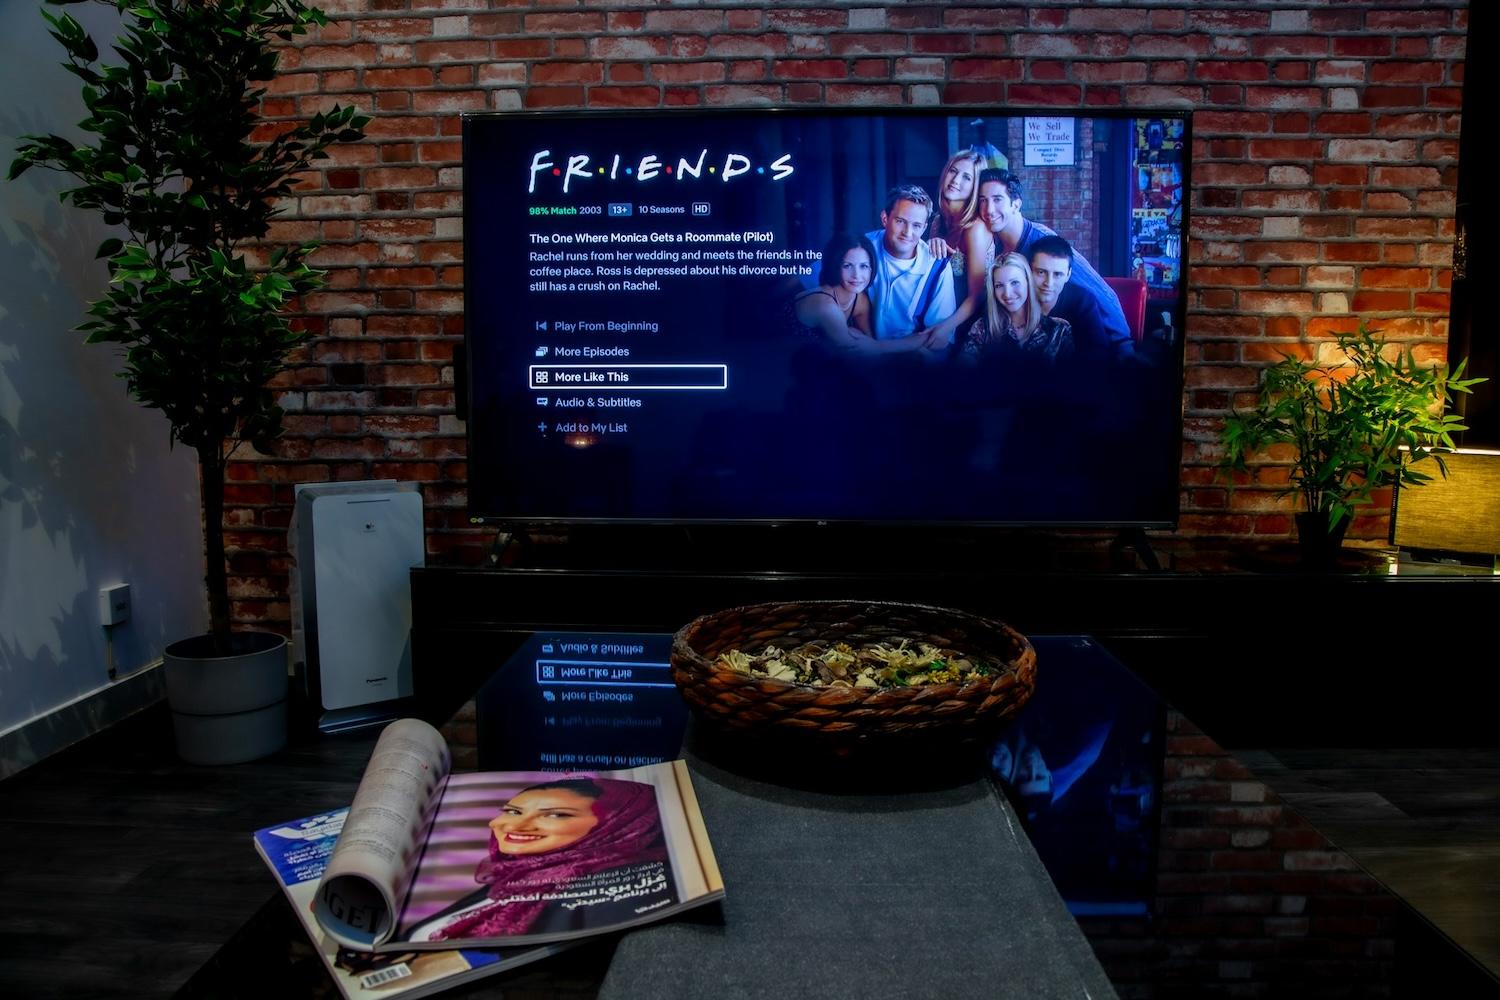 Friends streaming on Netflix on a TV in a living room